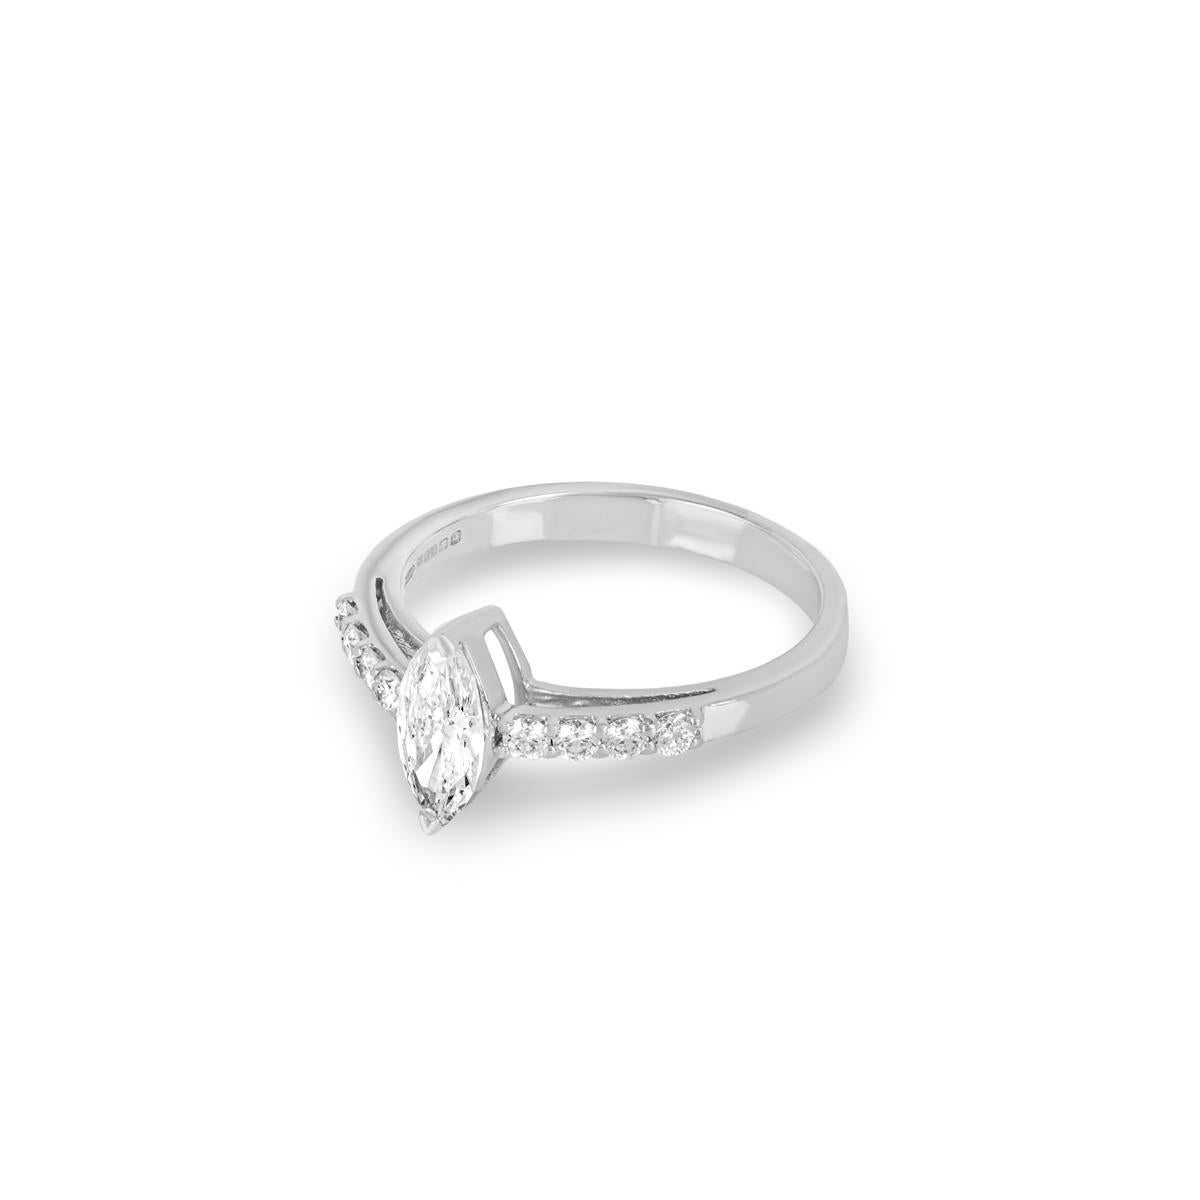 Women's White Gold Marquise Cut Diamond Ring 0.53ct I/VS1 For Sale